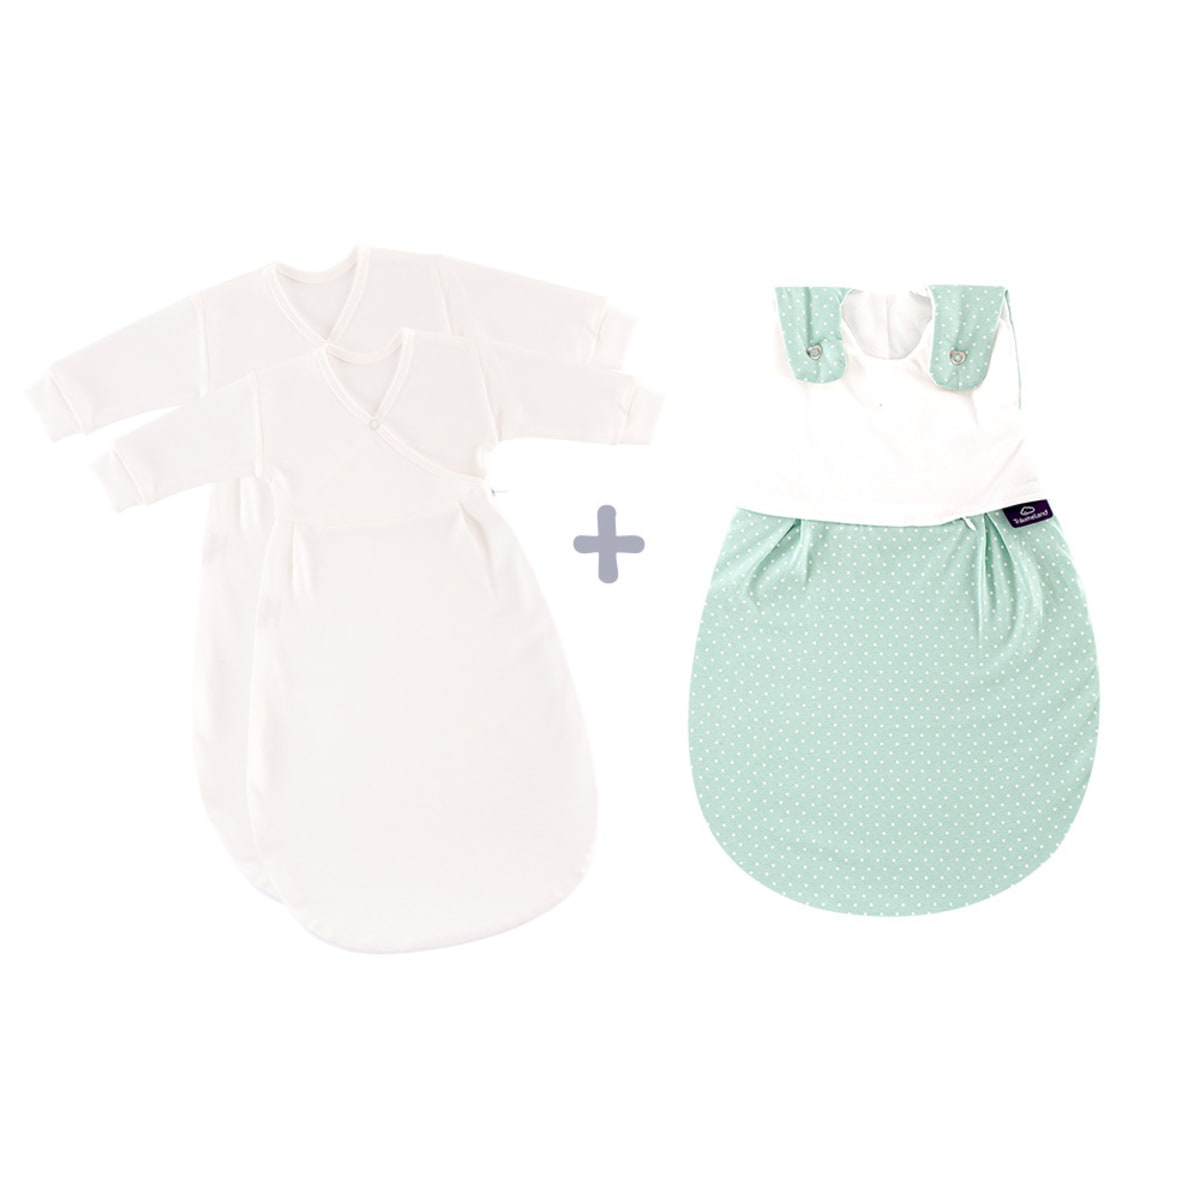 LIEBMICH sleeping bag set in the design little dots mint with 2 inner sleeping bags